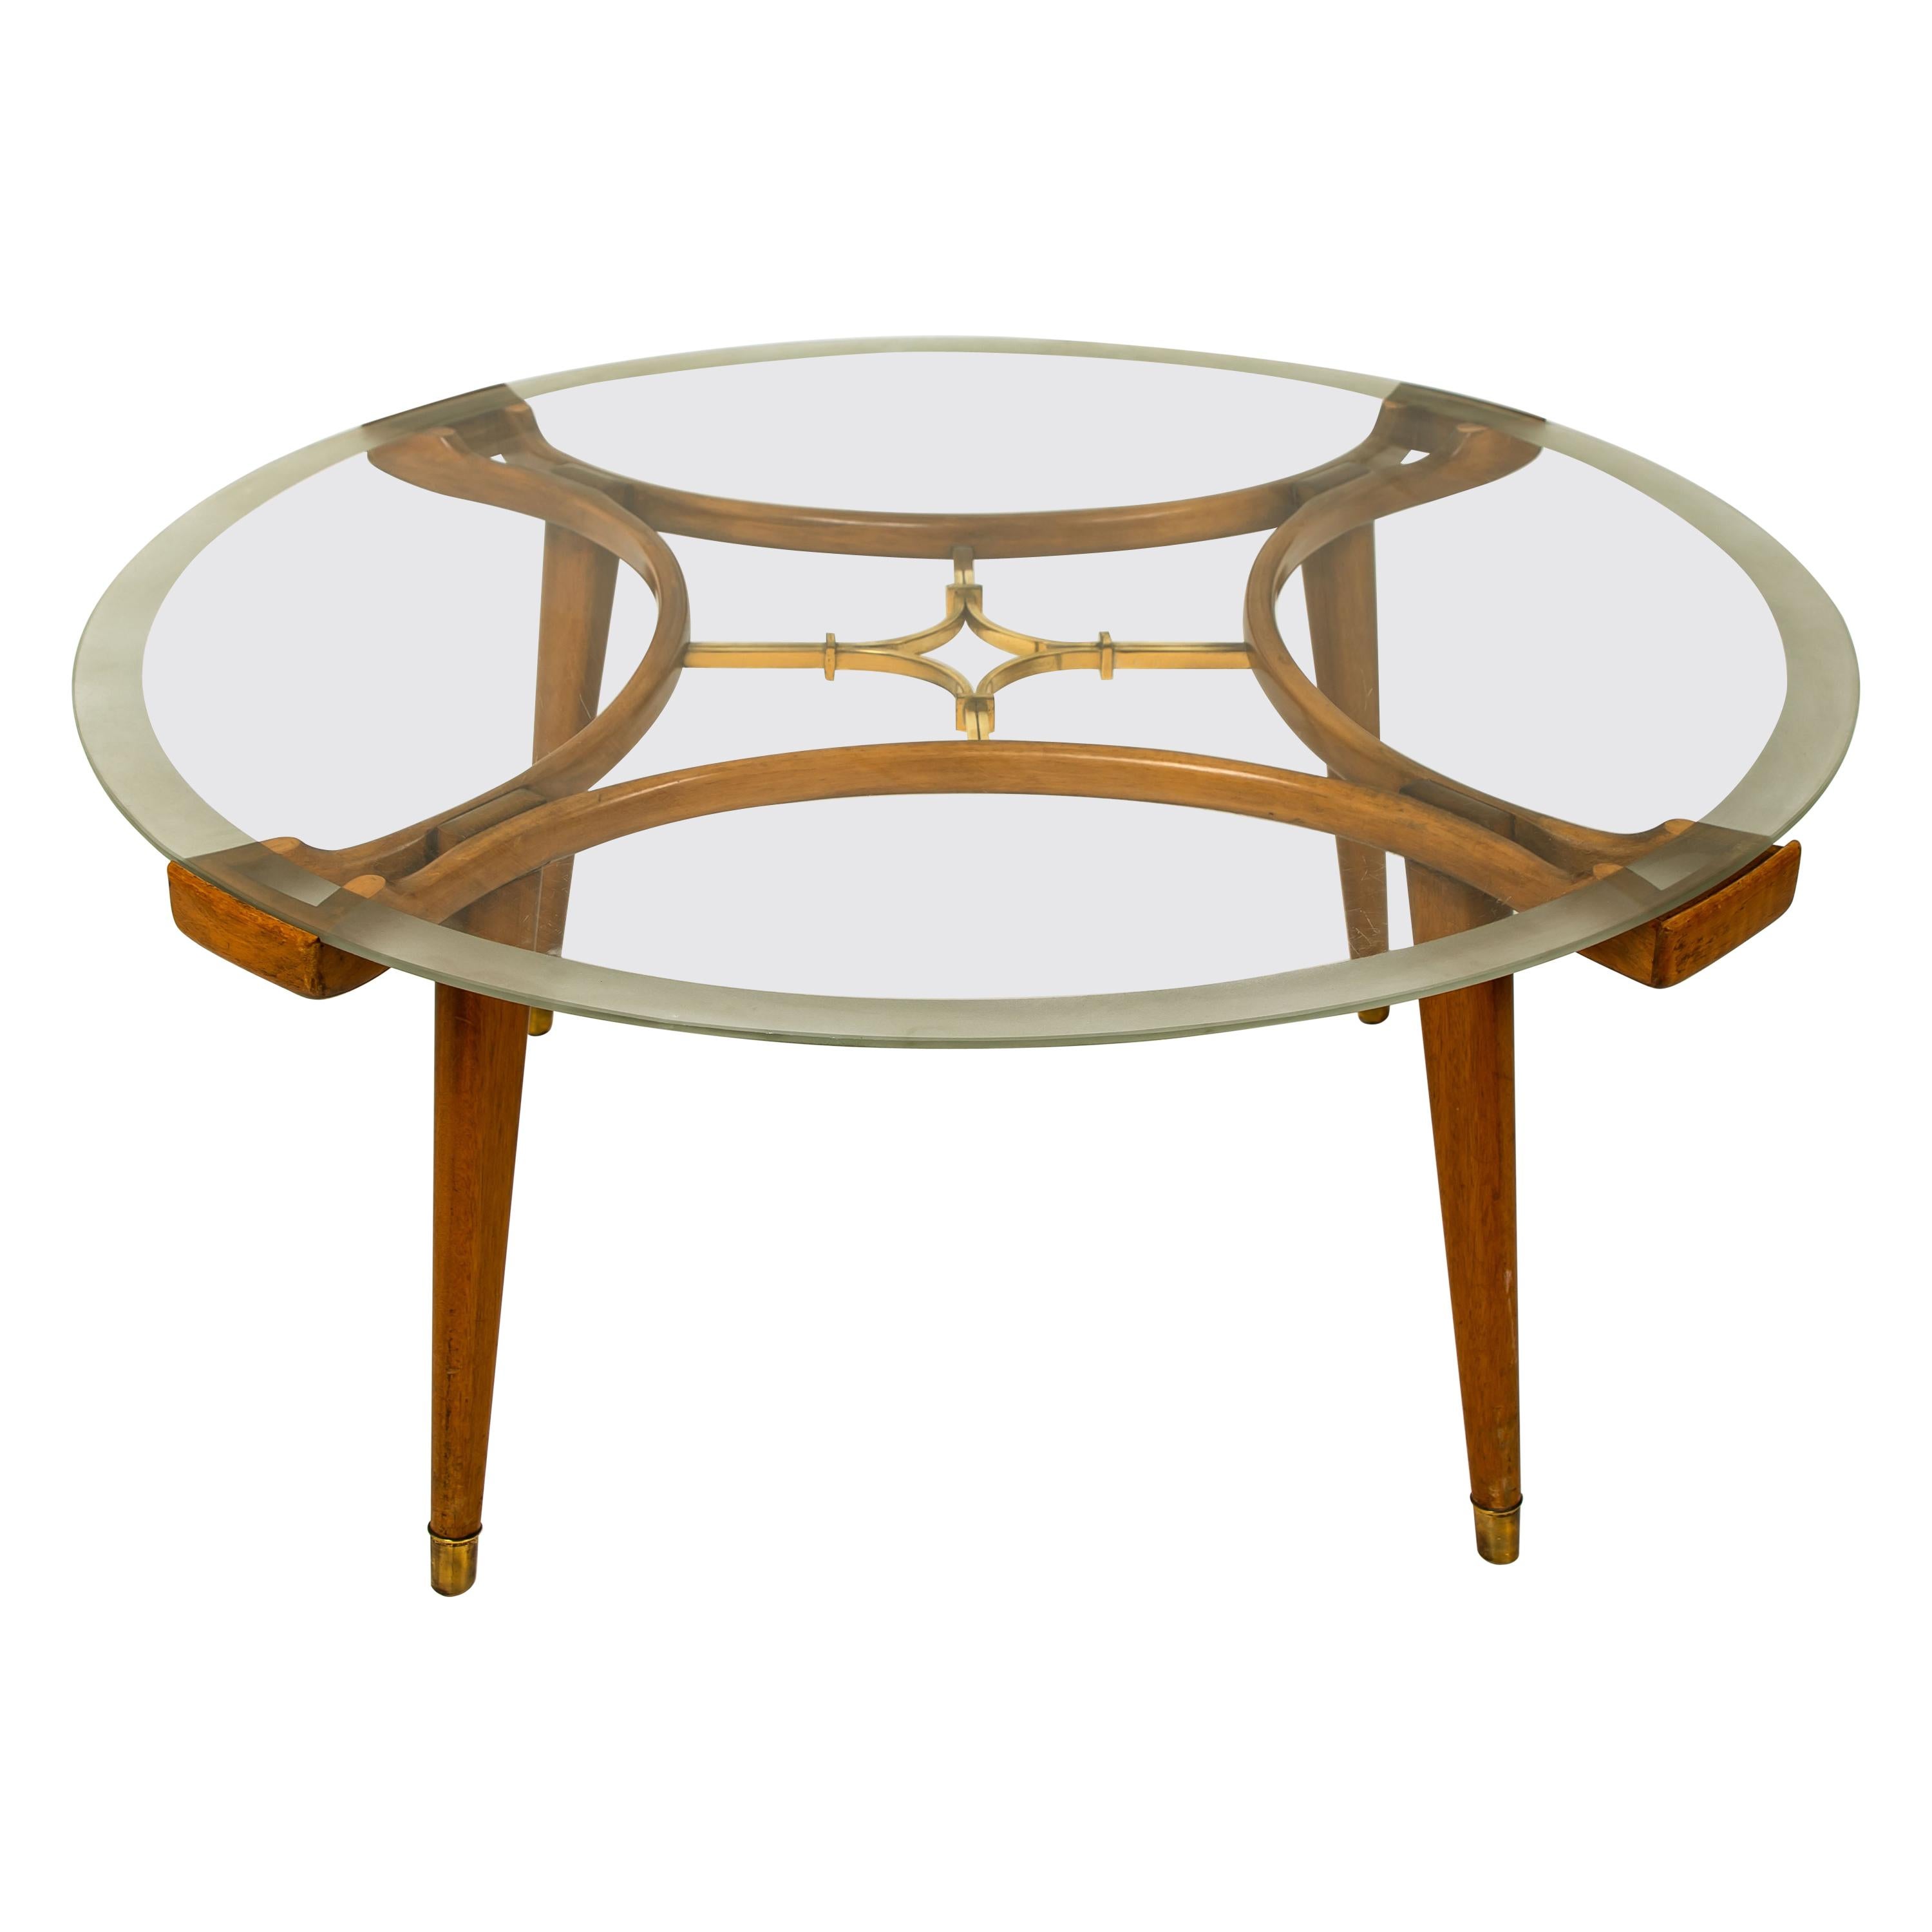 Solid Brass Walnut Glass Table, by William Watting, Produced by Fristho, 1950s